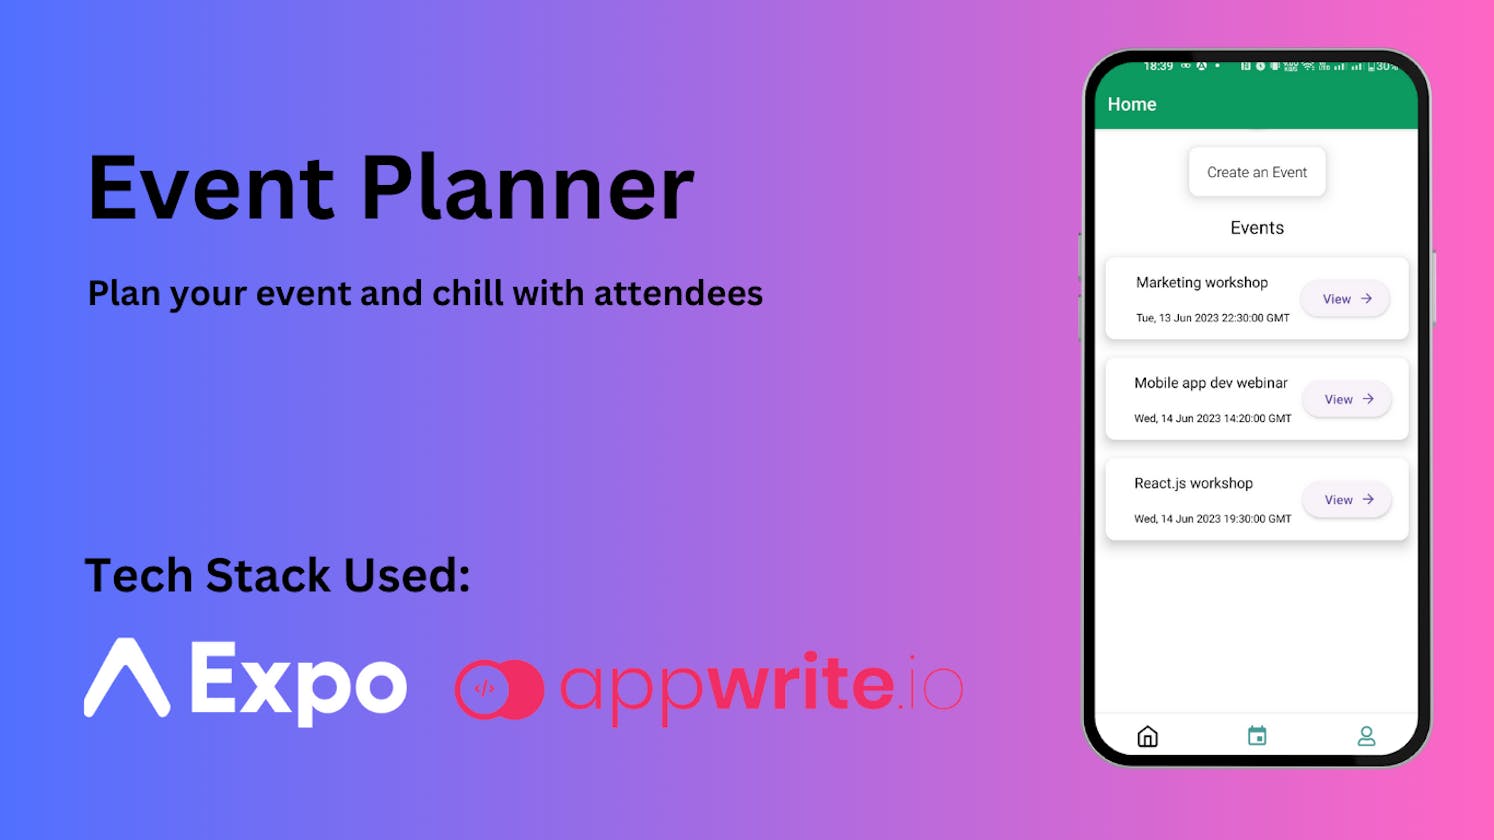 Event Planner App using React-Native Expo and Appwrite